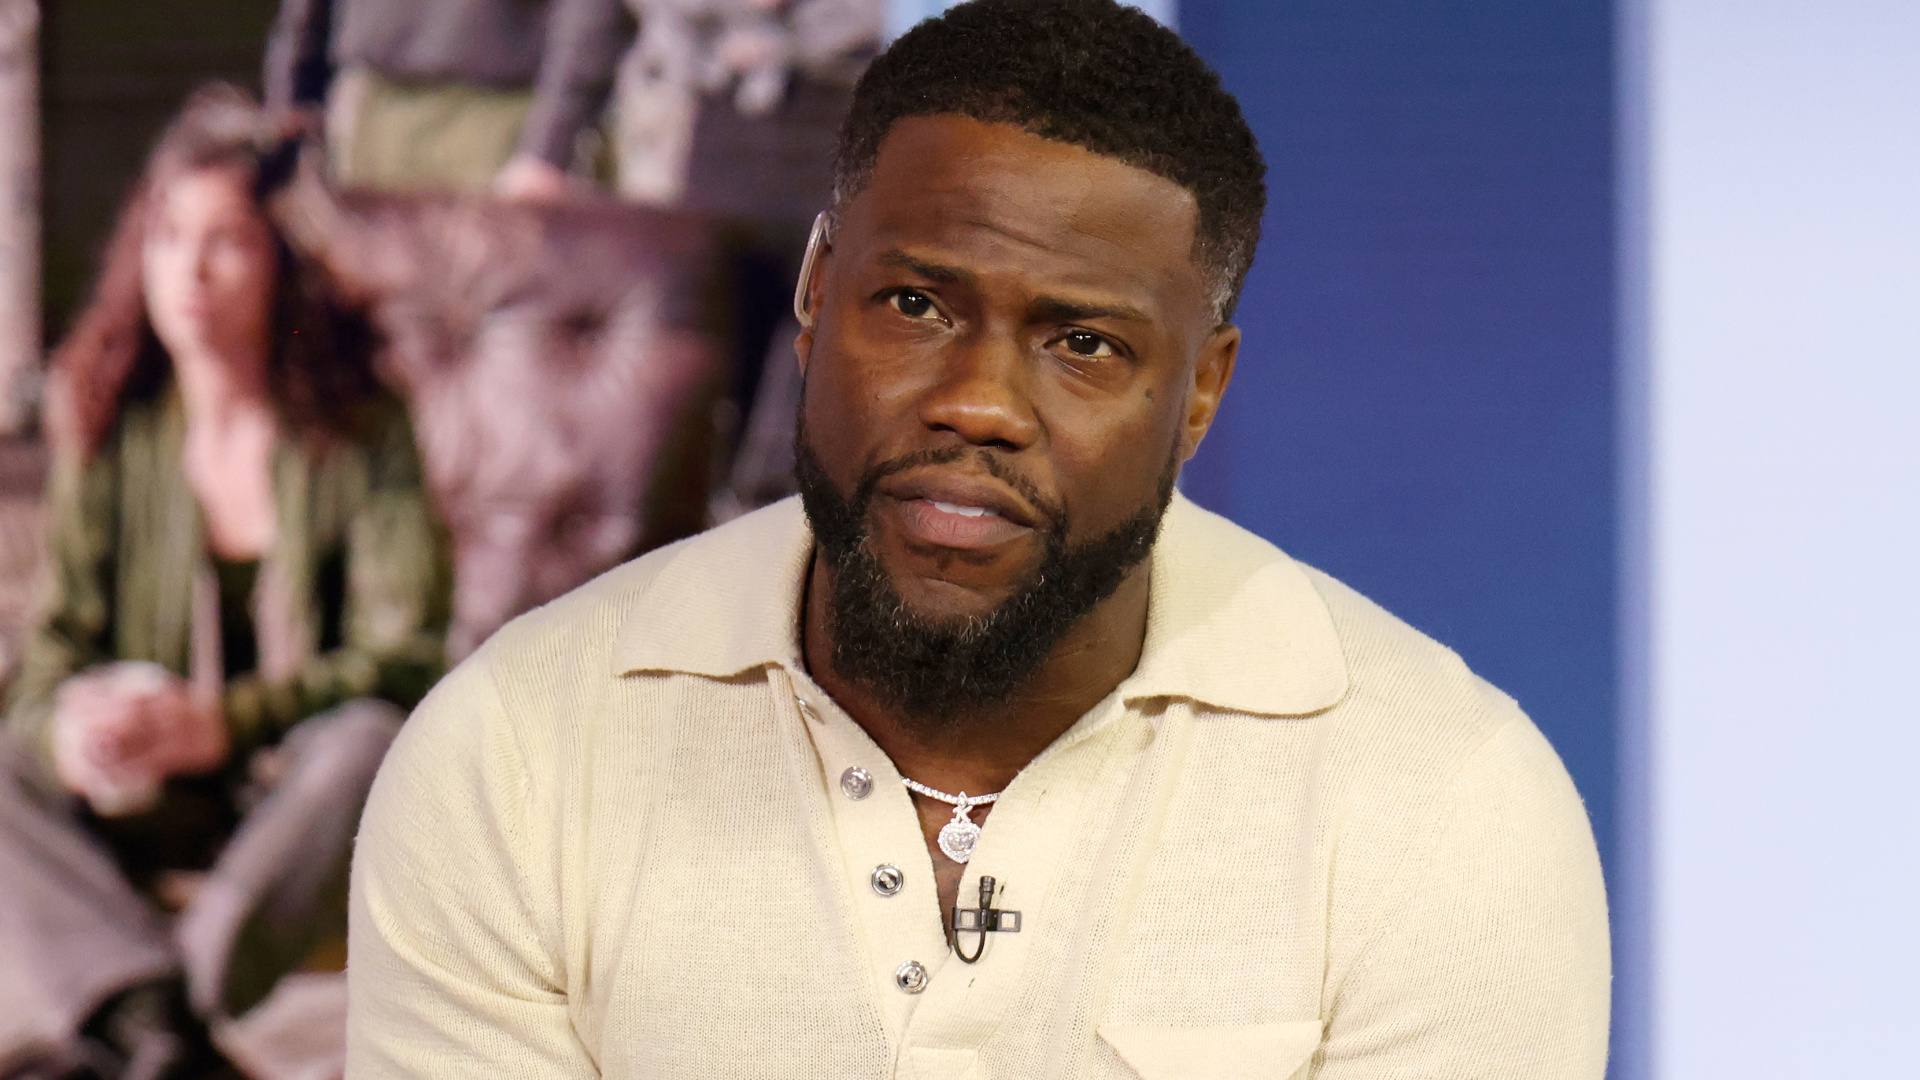 Why did Kevin Hart's friend sue him for 12 million dollars?